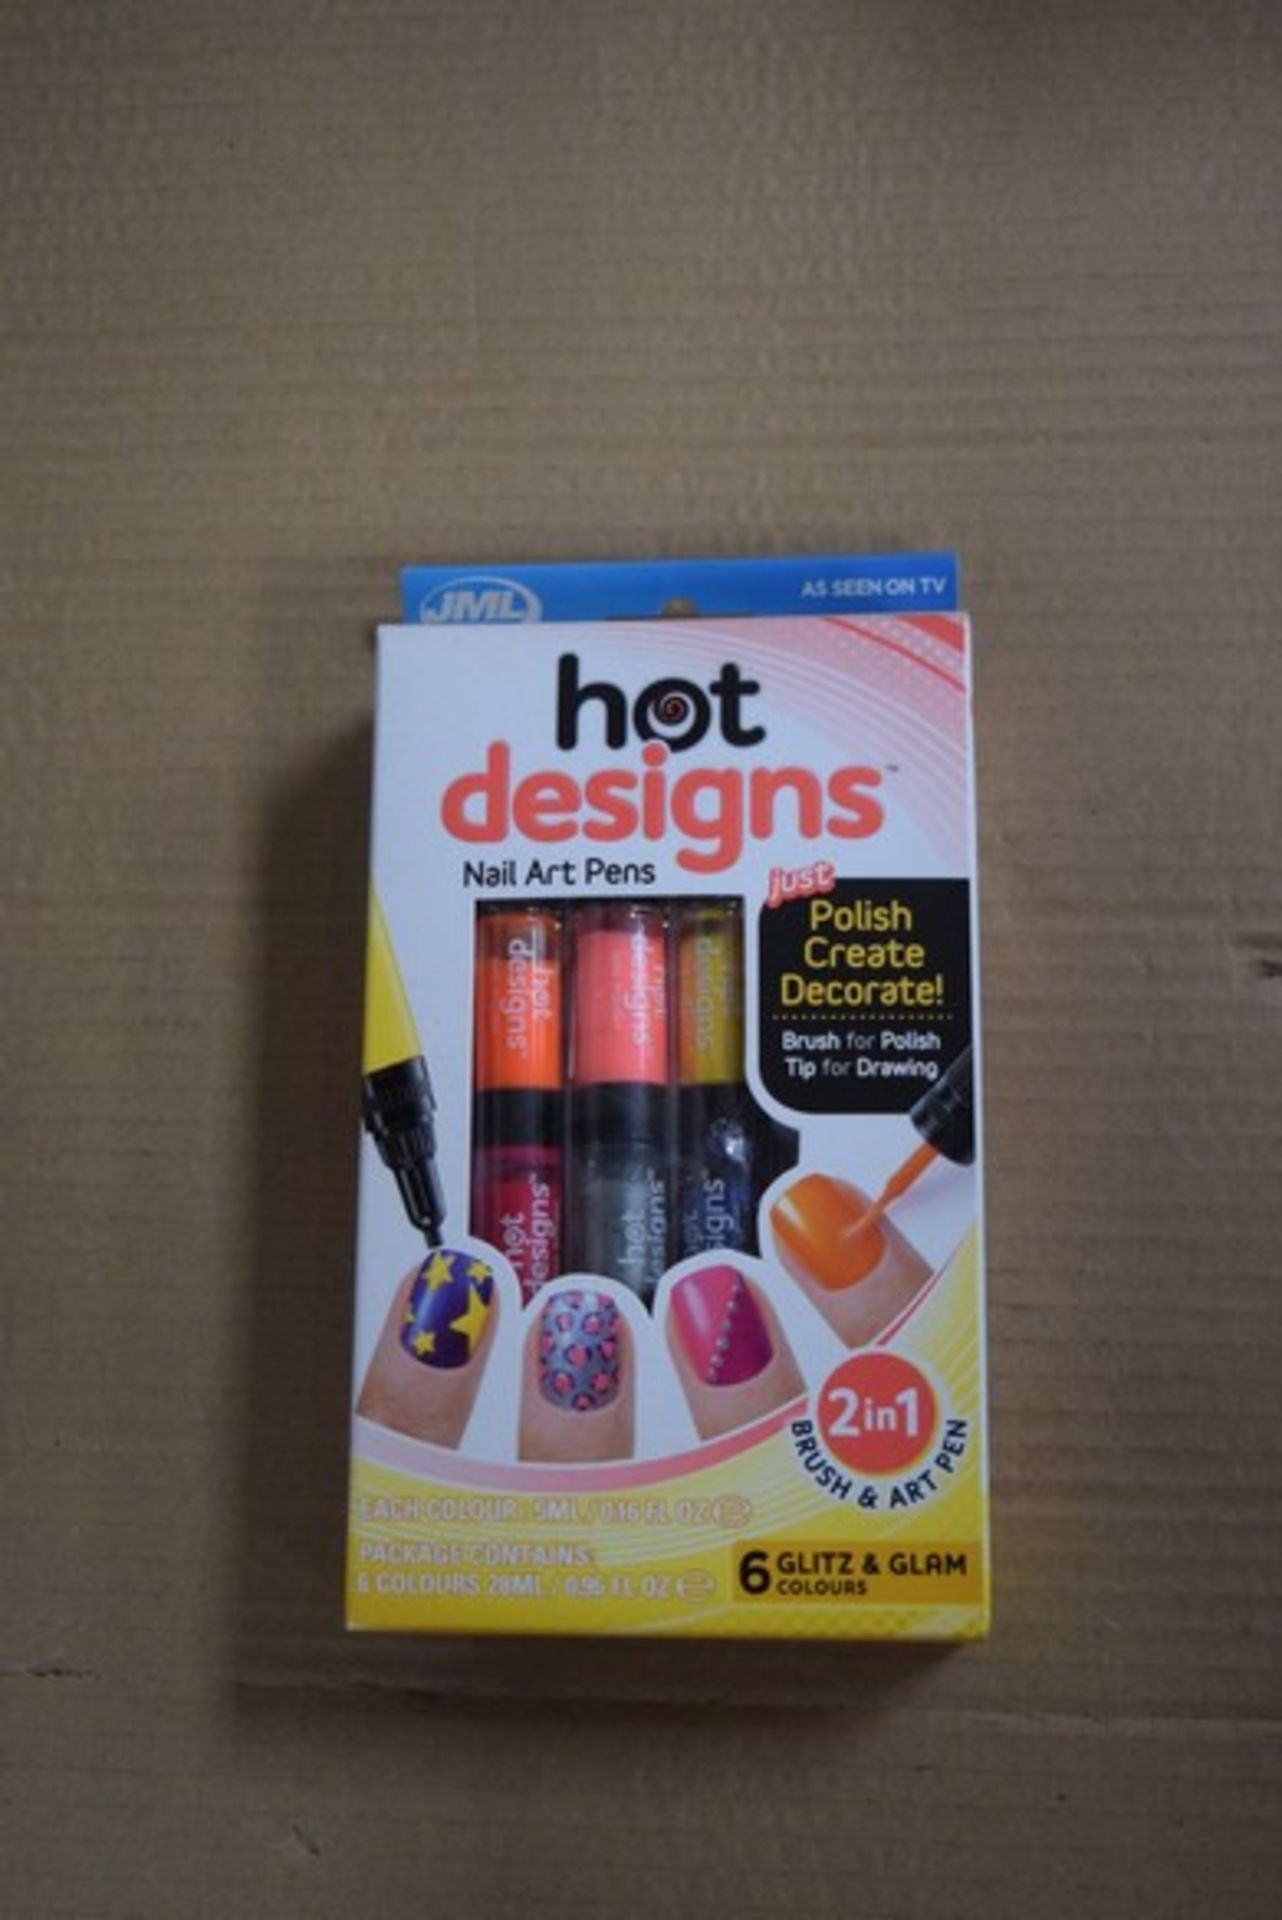 1 x BOX OF 8 PACKS OF HOT DESIGNS GLITZ AND GLAM NAIL ART PENS RRP £10 PER PACK *PLEASE NOTE THAT